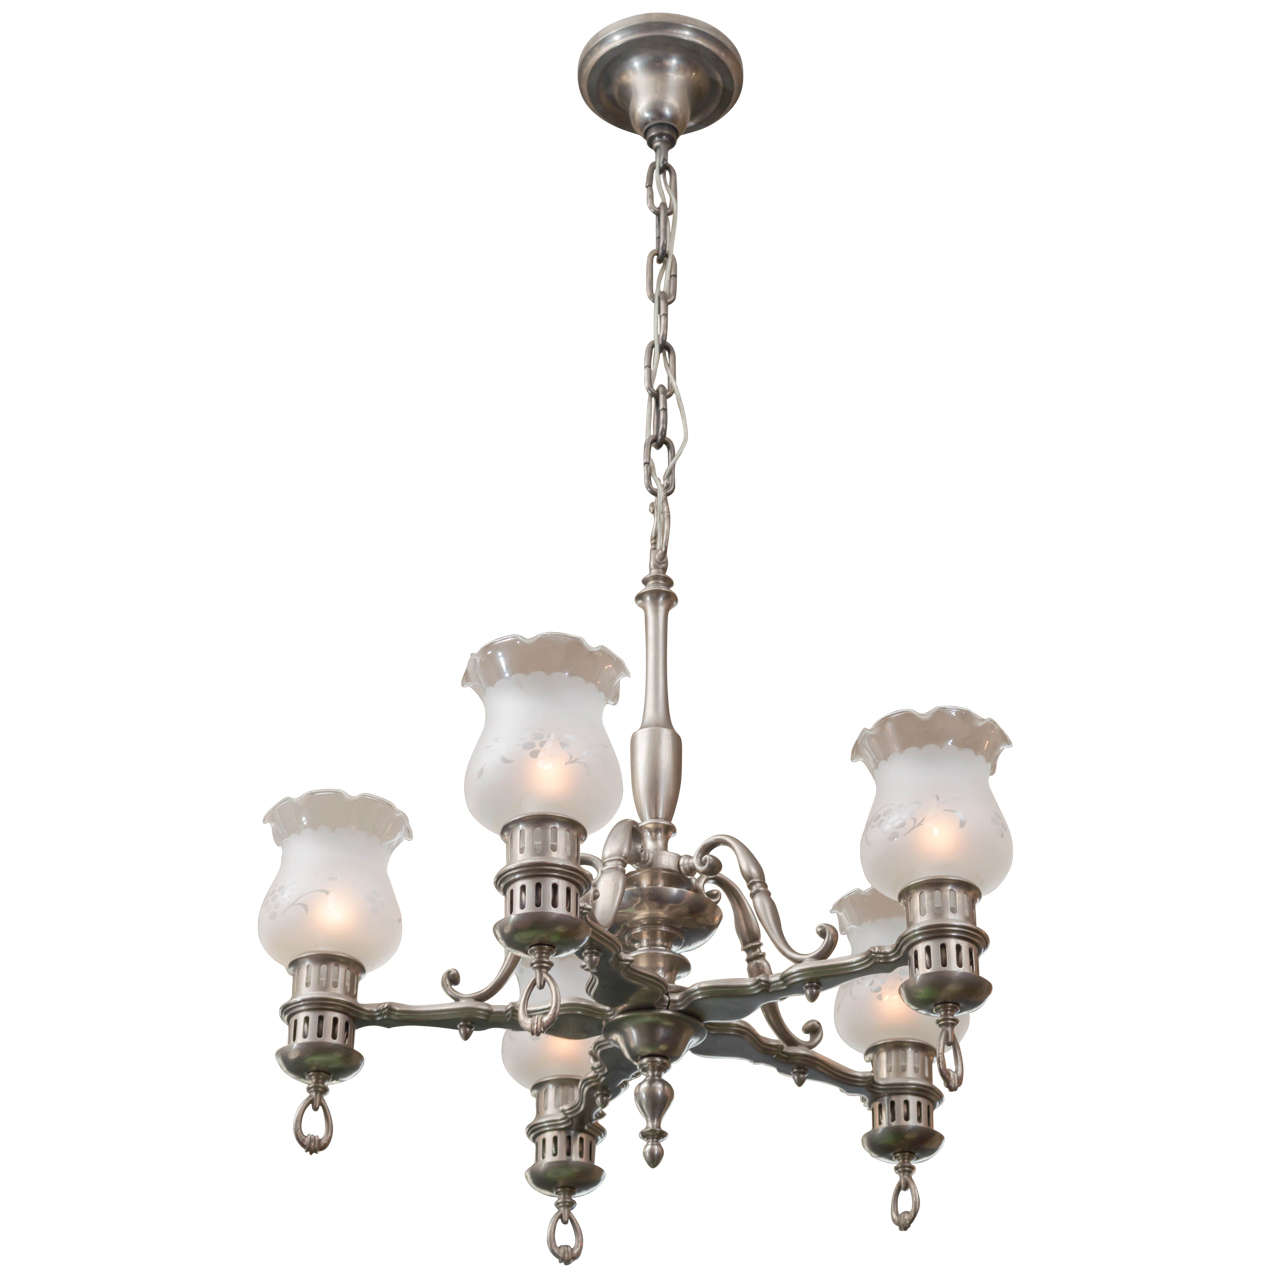 Five-Arm Brushed Nickel Chandelier Colonial Style